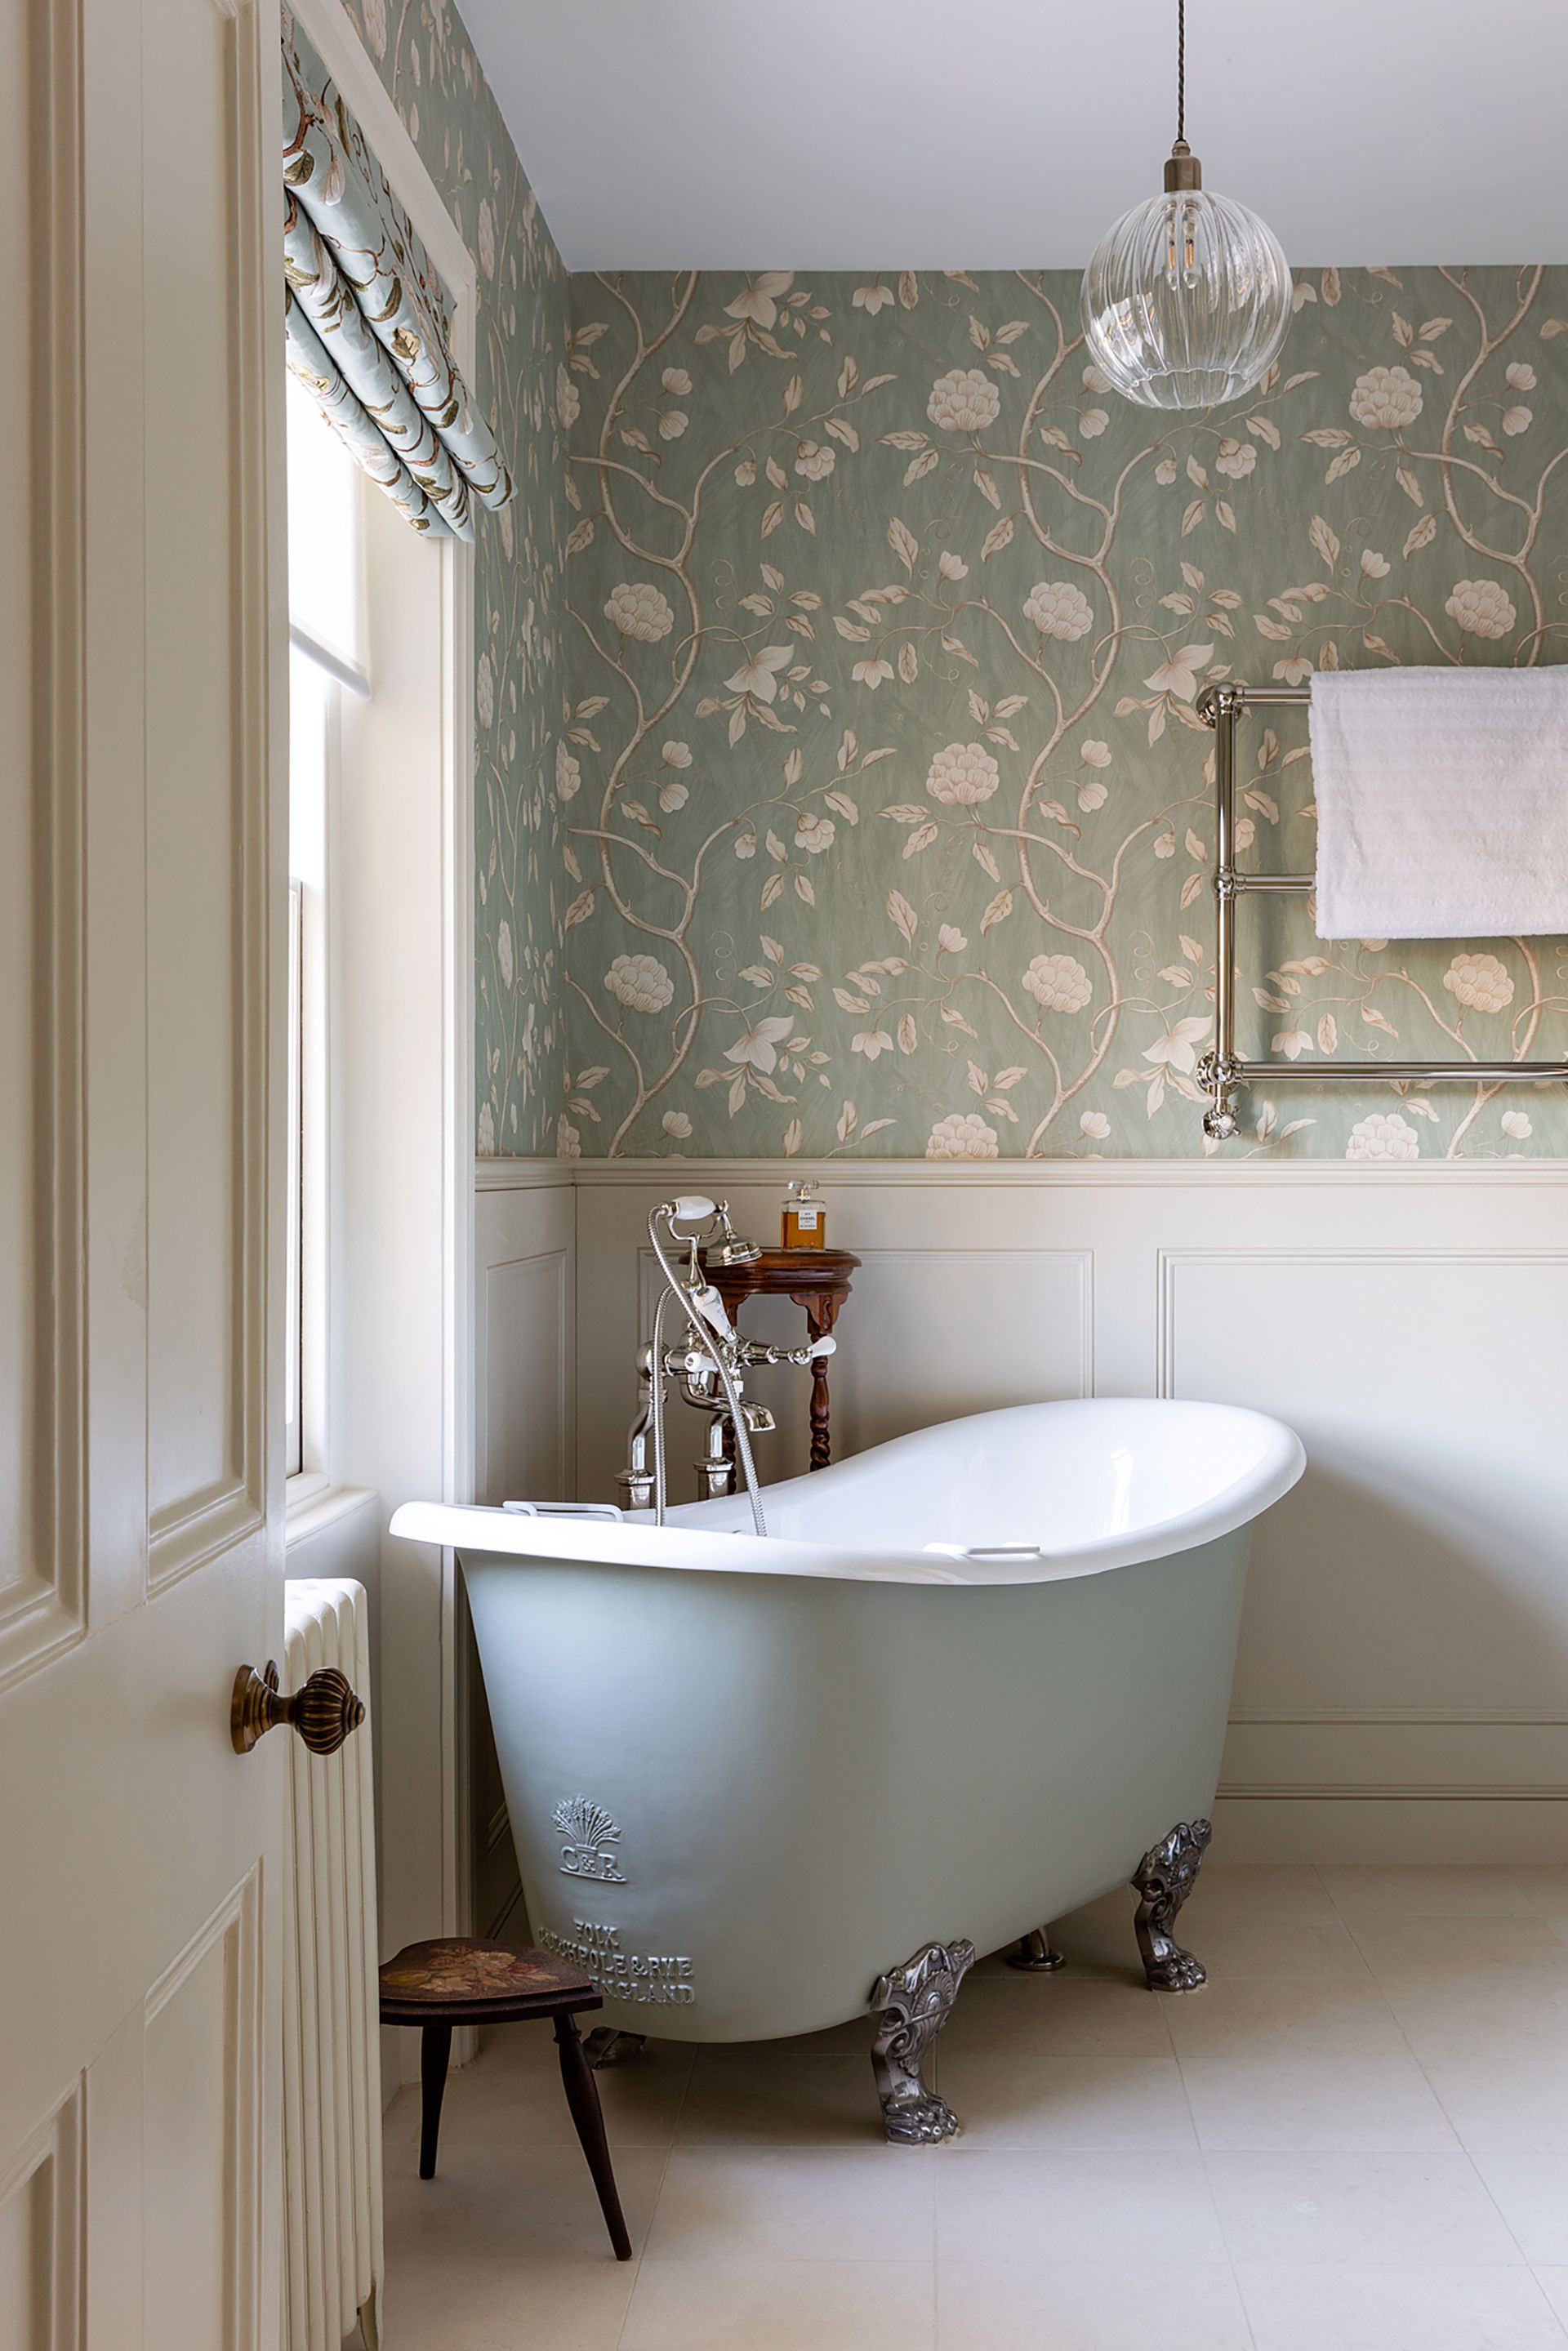 12 vintage bathroom ideas – create a timeless space you will love for years